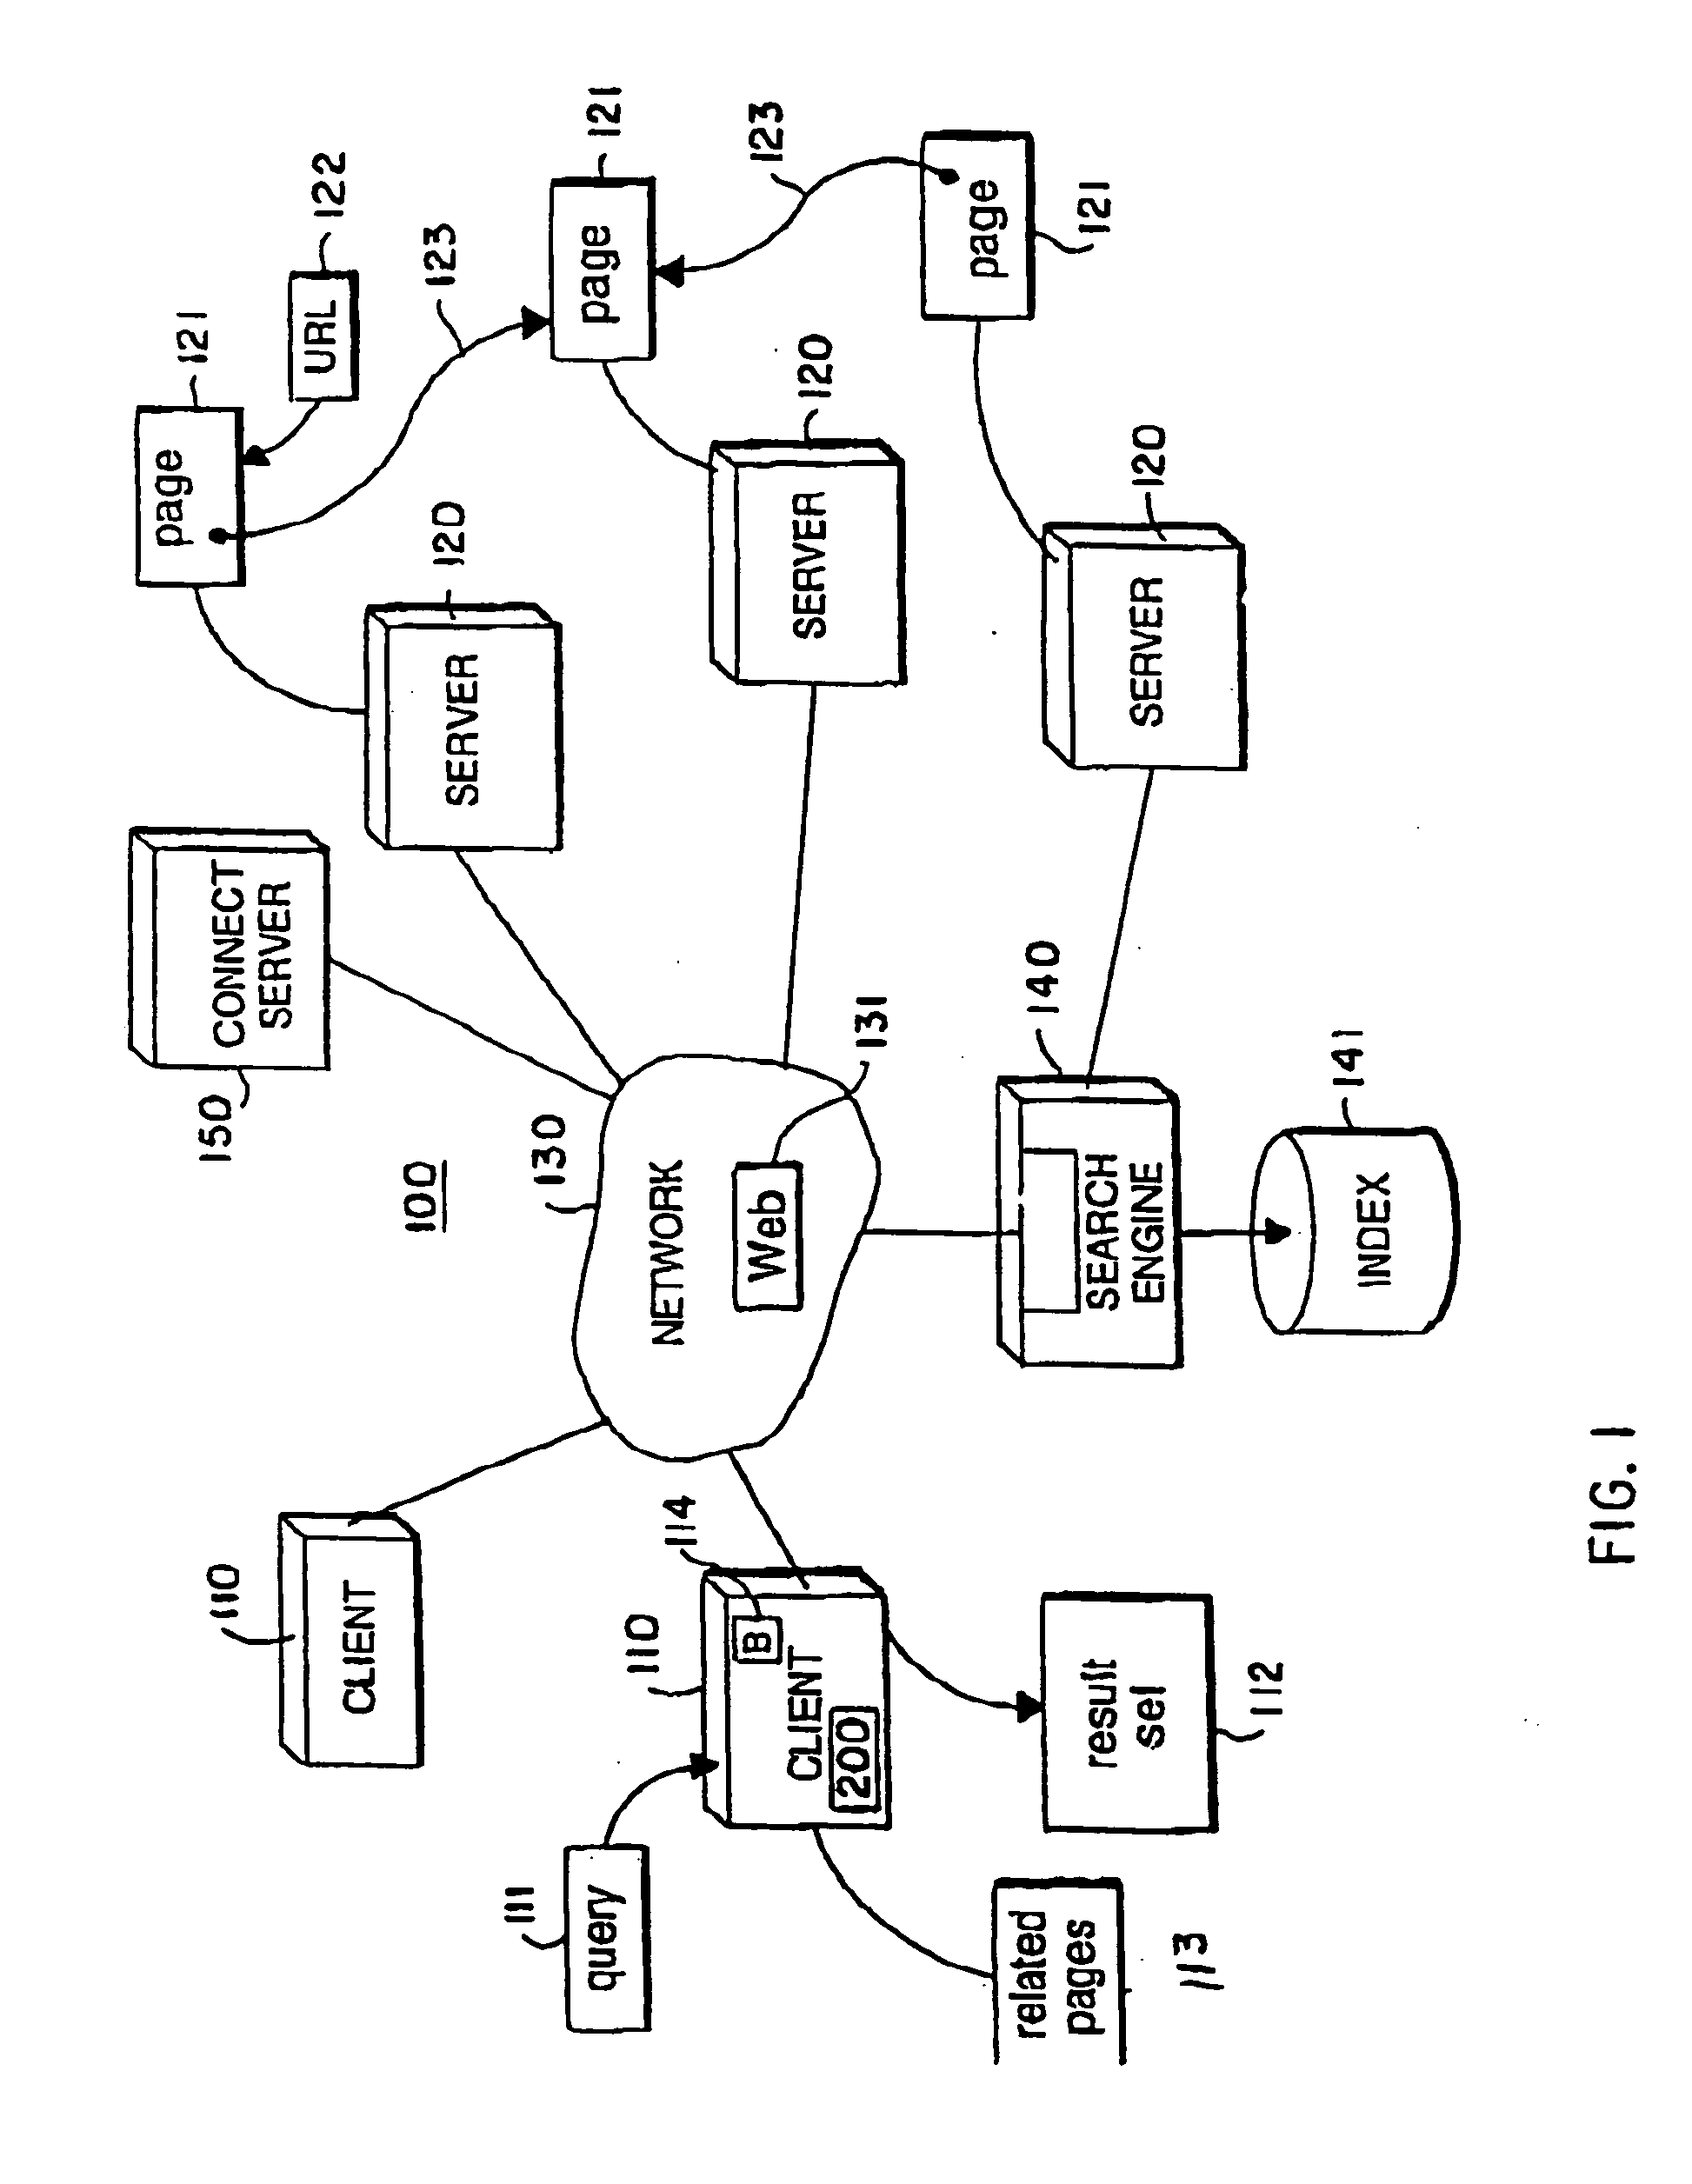 Method and apparatus for ranking web page search results